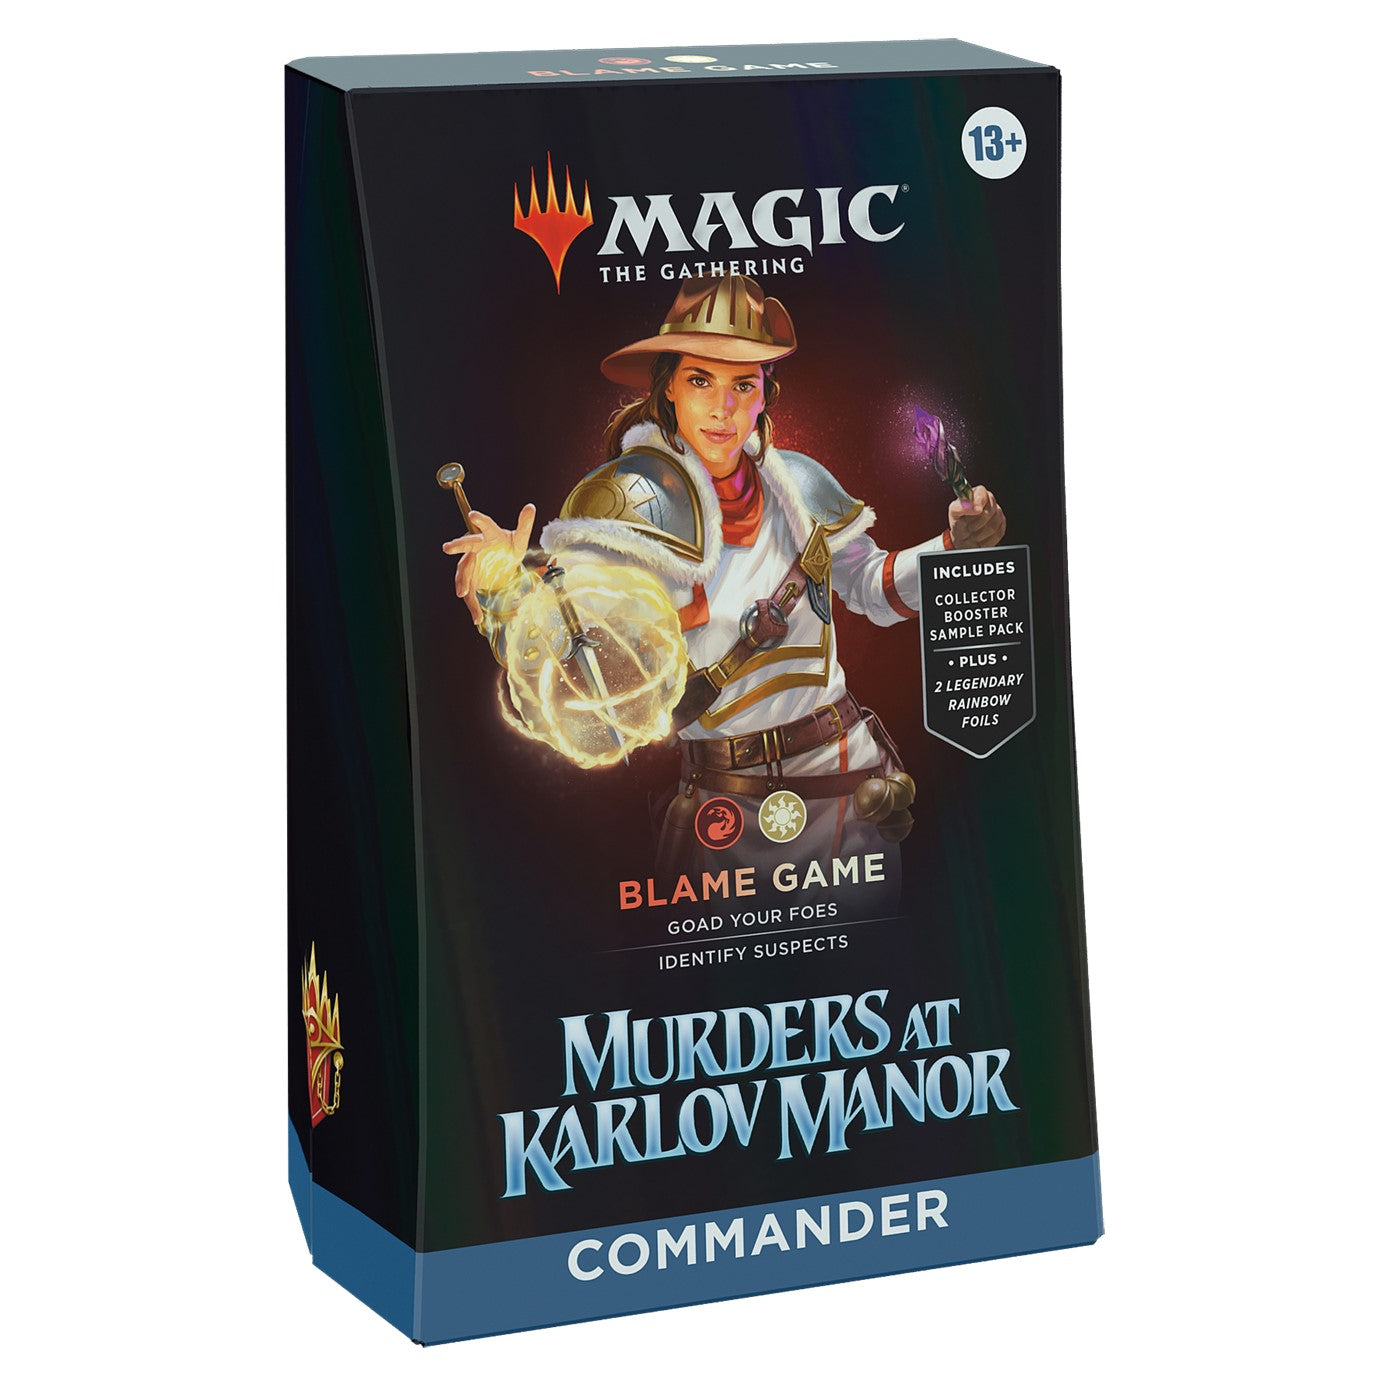 Magic The Gathering - Murders at Karlov Manor, Blame Game Commander Deck Magic The Gathering Wizards of the Coast Default Title  